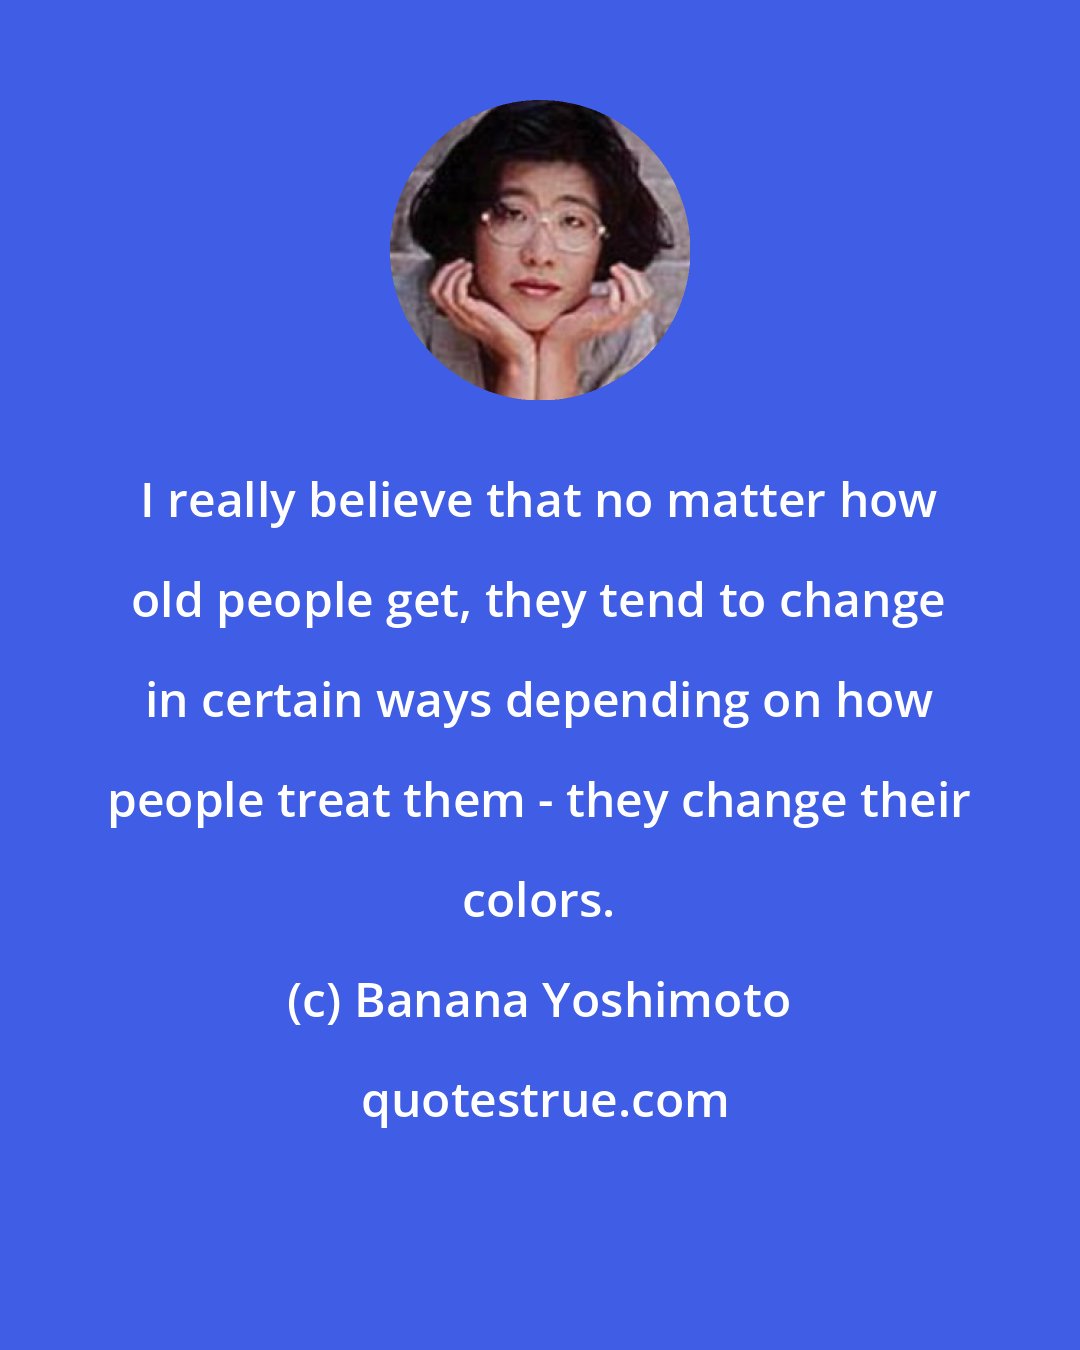 Banana Yoshimoto: I really believe that no matter how old people get, they tend to change in certain ways depending on how people treat them - they change their colors.